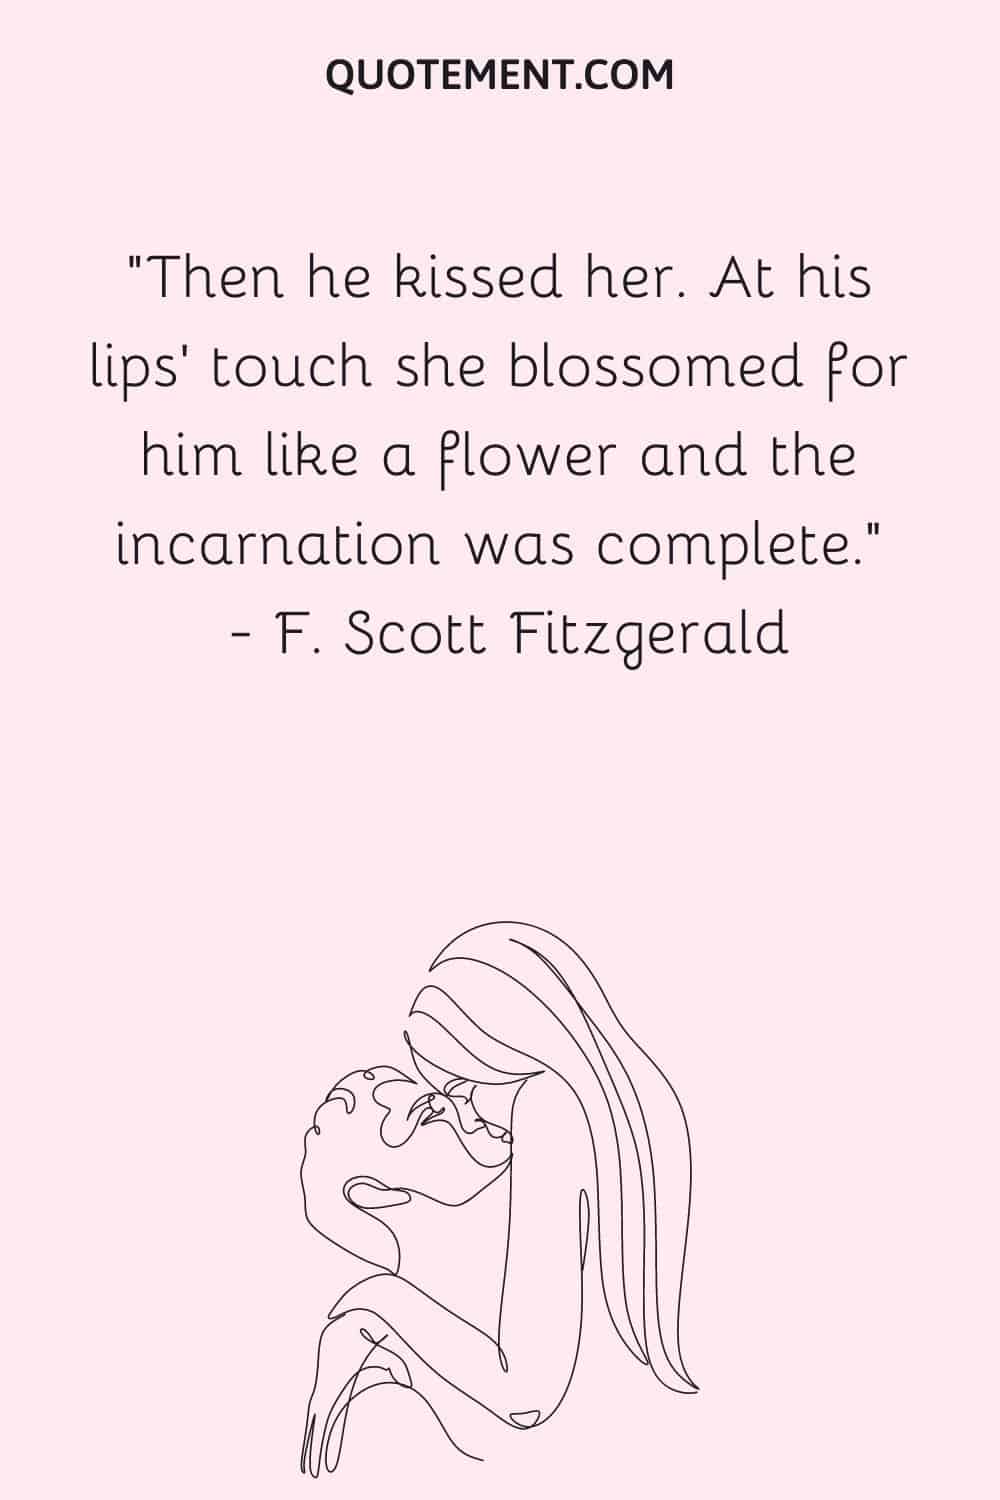 Then he kissed her. At his lips' touch she blossomed for him like a flower and the incarnation was complete. ― F. Scott Fitzgerald